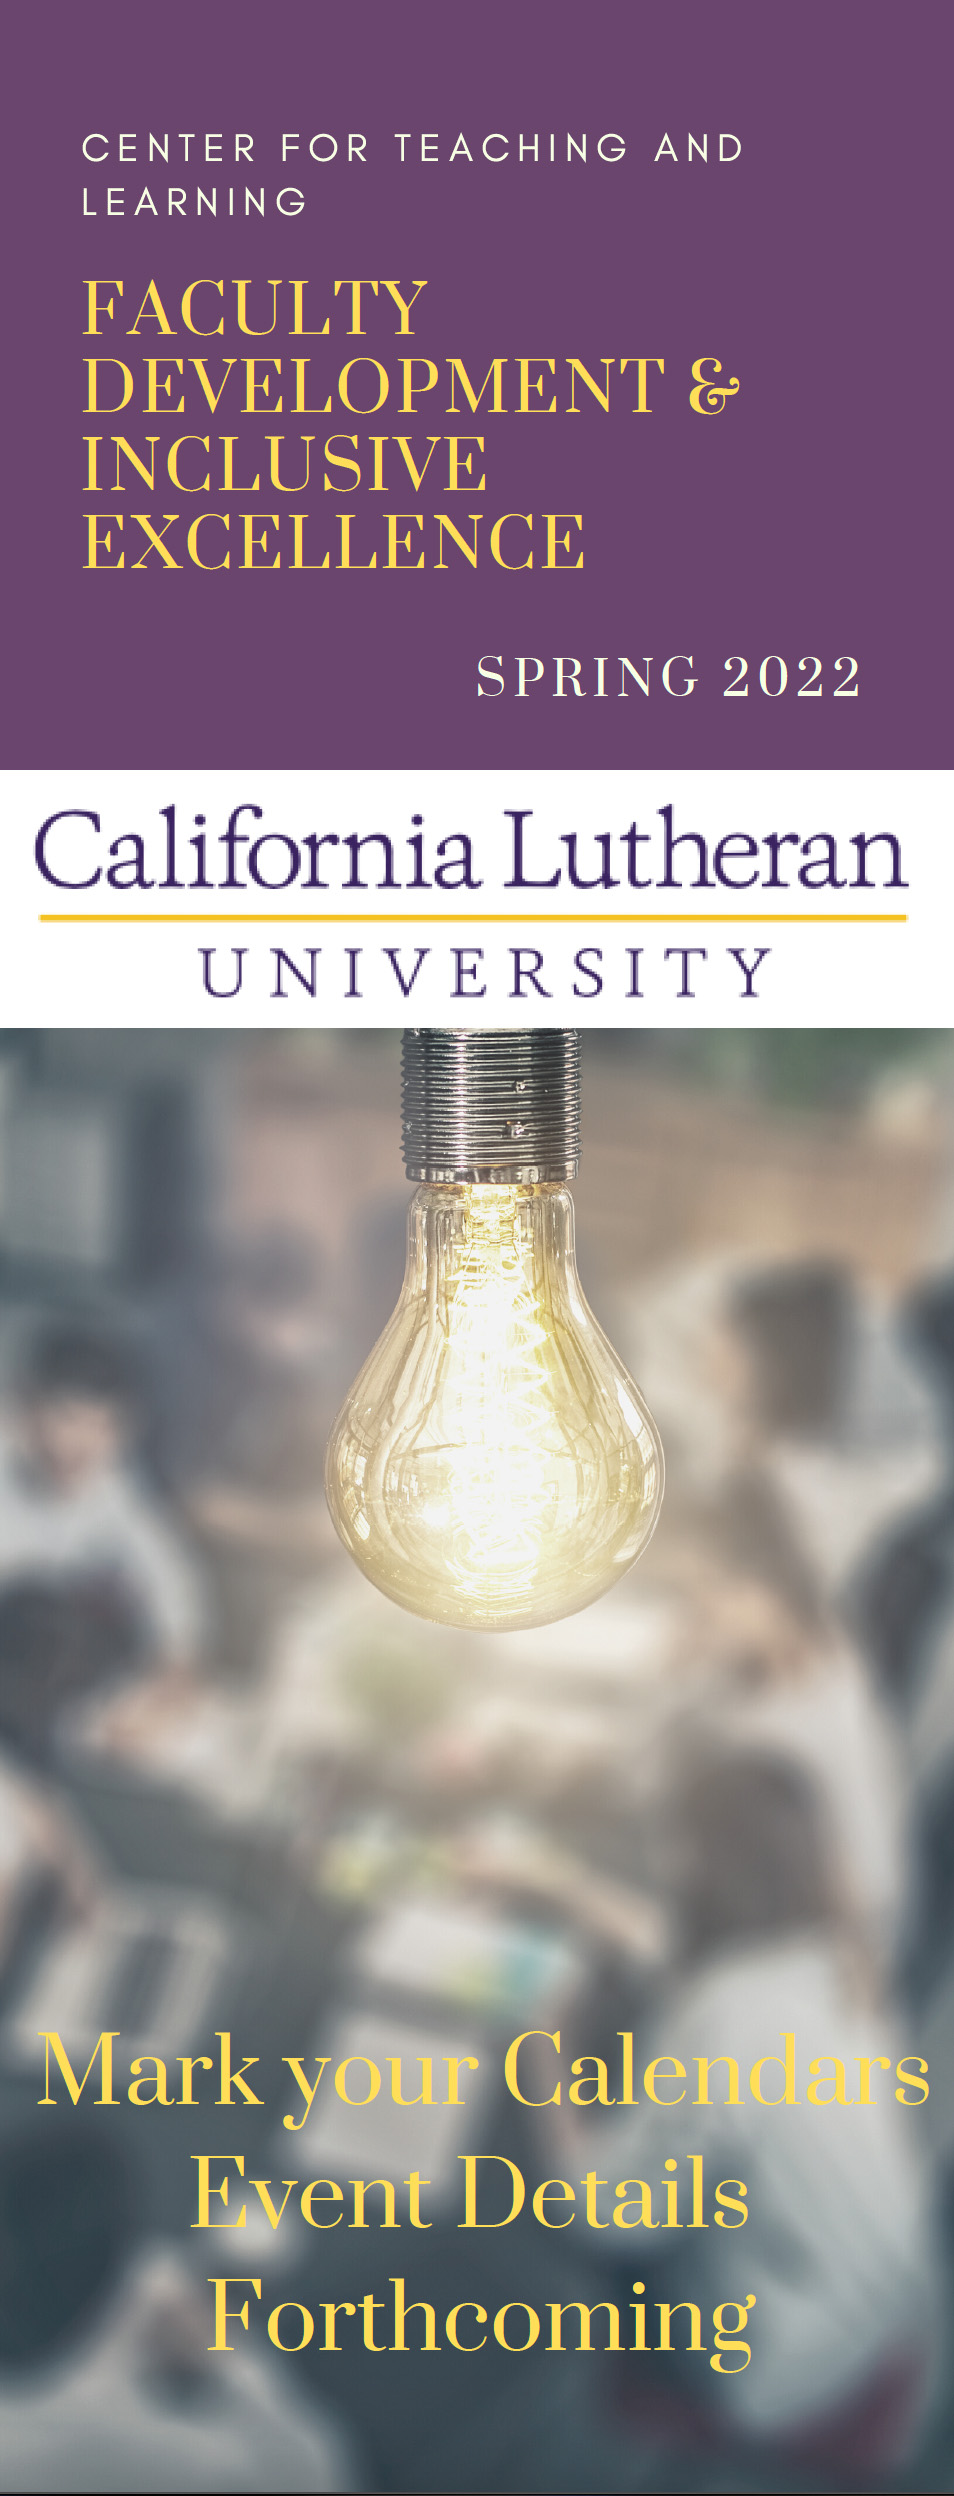 Column image reads: Center for Teaching and Learning, Faculty Development & Inclusive Excellence Spring 2022. California Lutheran University Logo. Mark your Calendars, Event Details Forthcoming